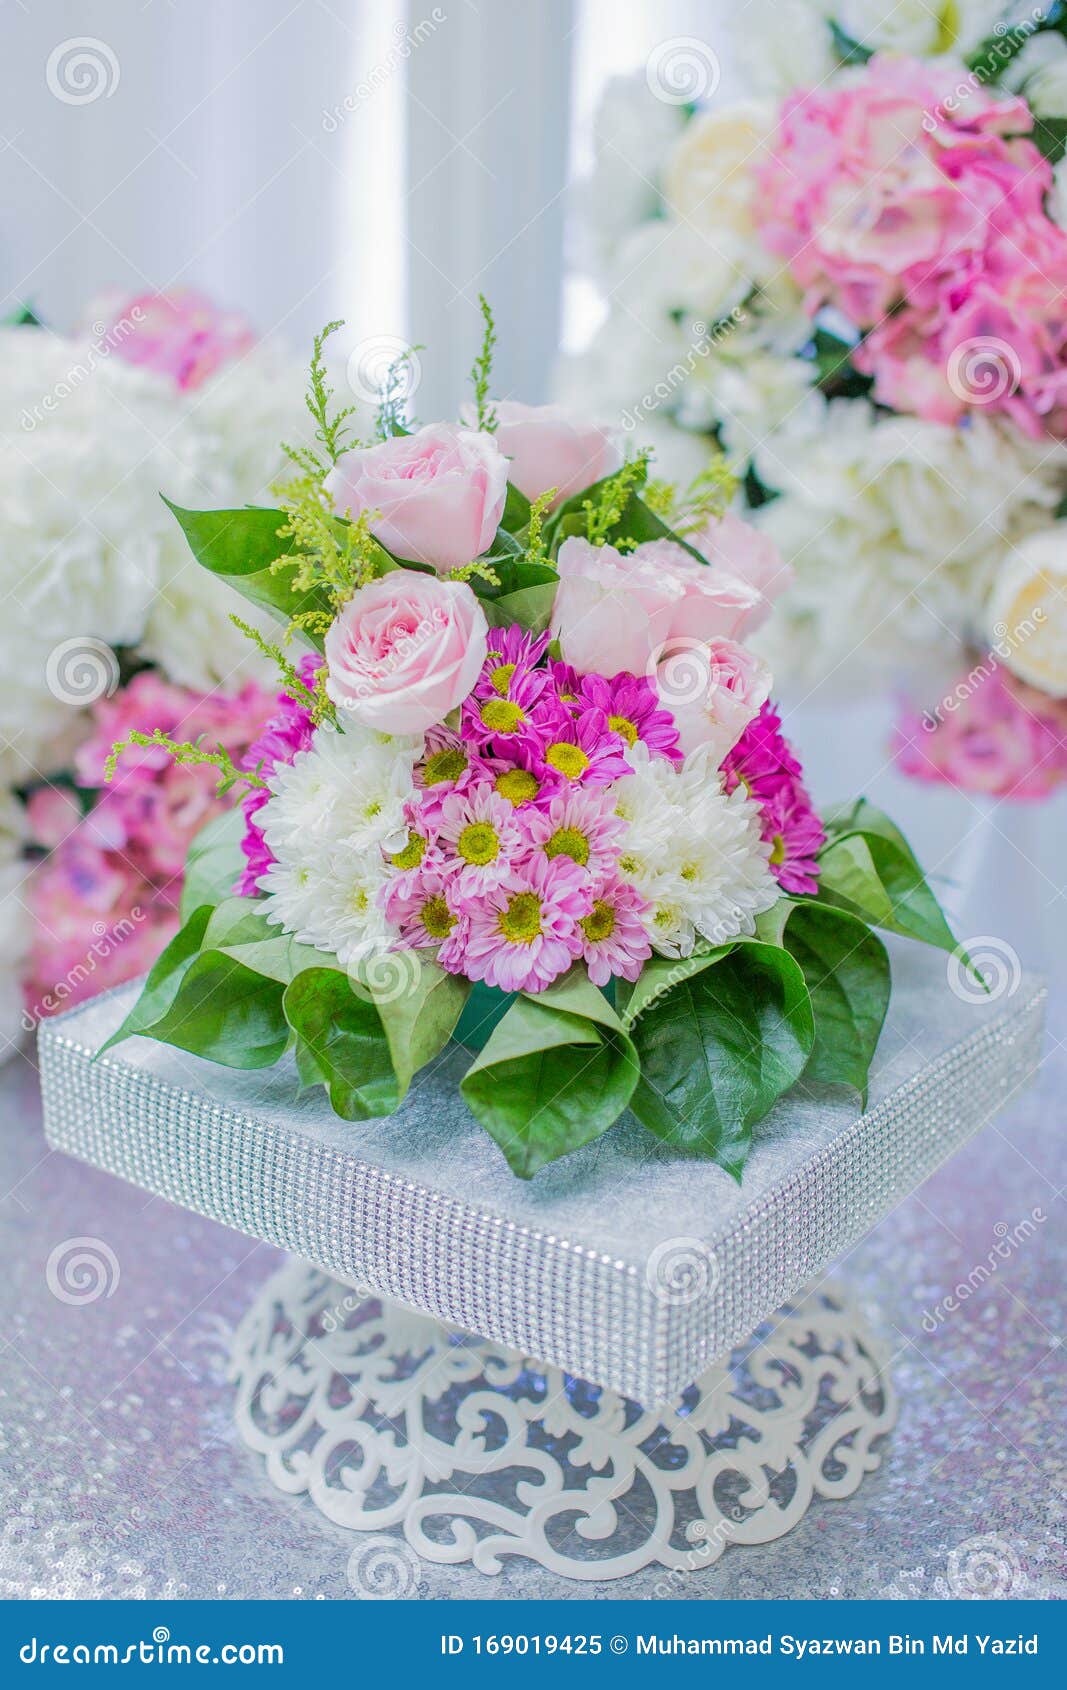 Betel Leaves Decorated As Wedding Gifts Are A Tradition In The Malay Wedding Stock Image Image Of Closeup Blessing 169019425